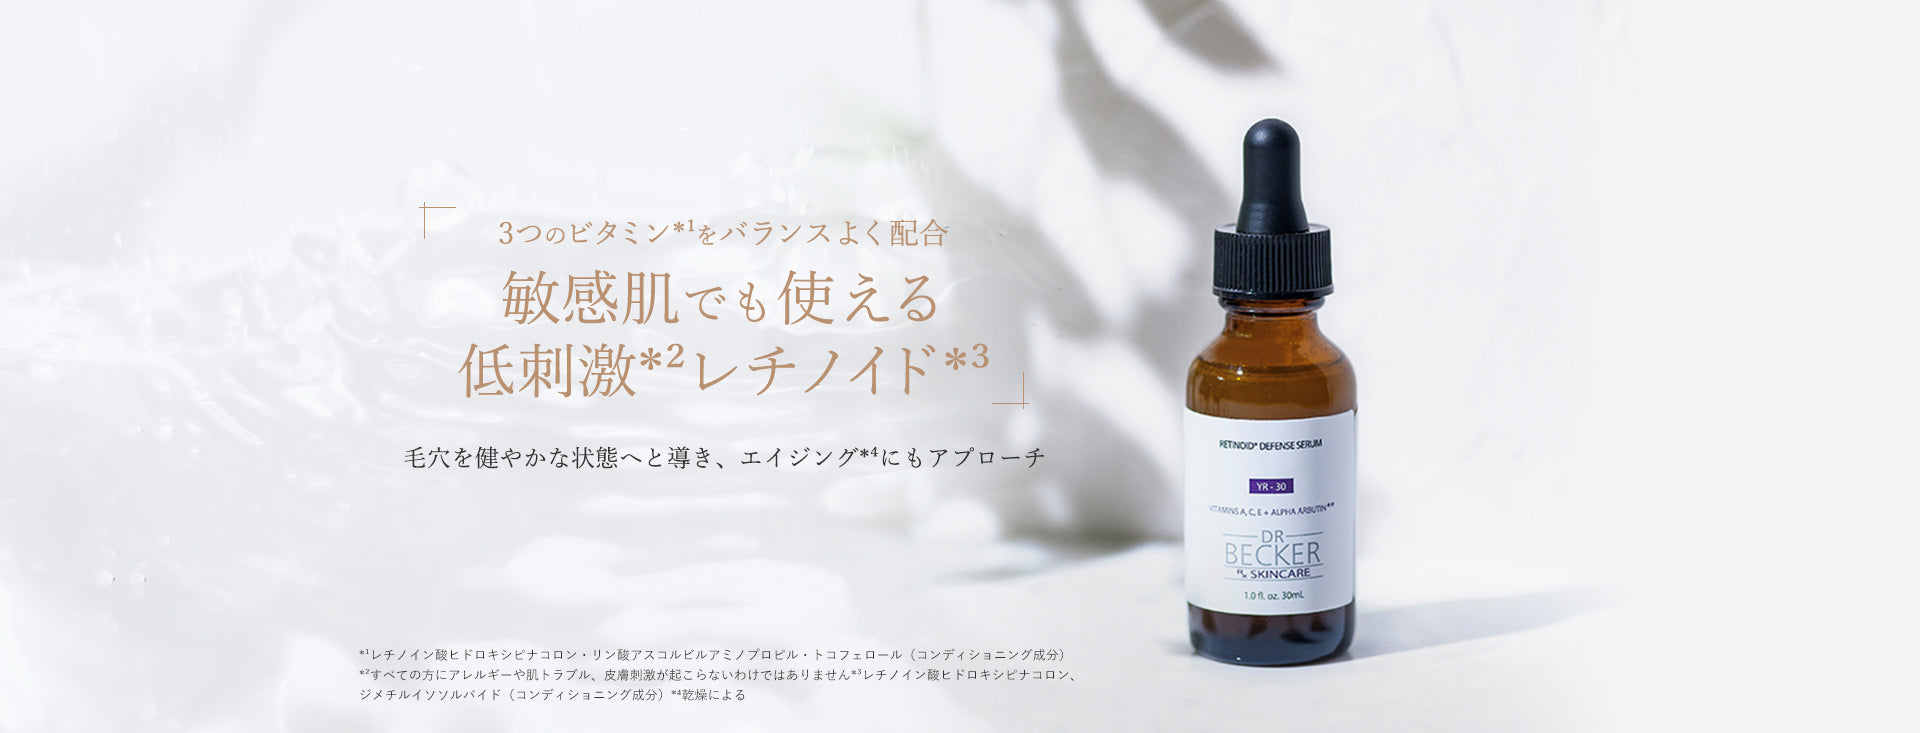 Hypoallergenic retinoid that can be used even on sensitive skin